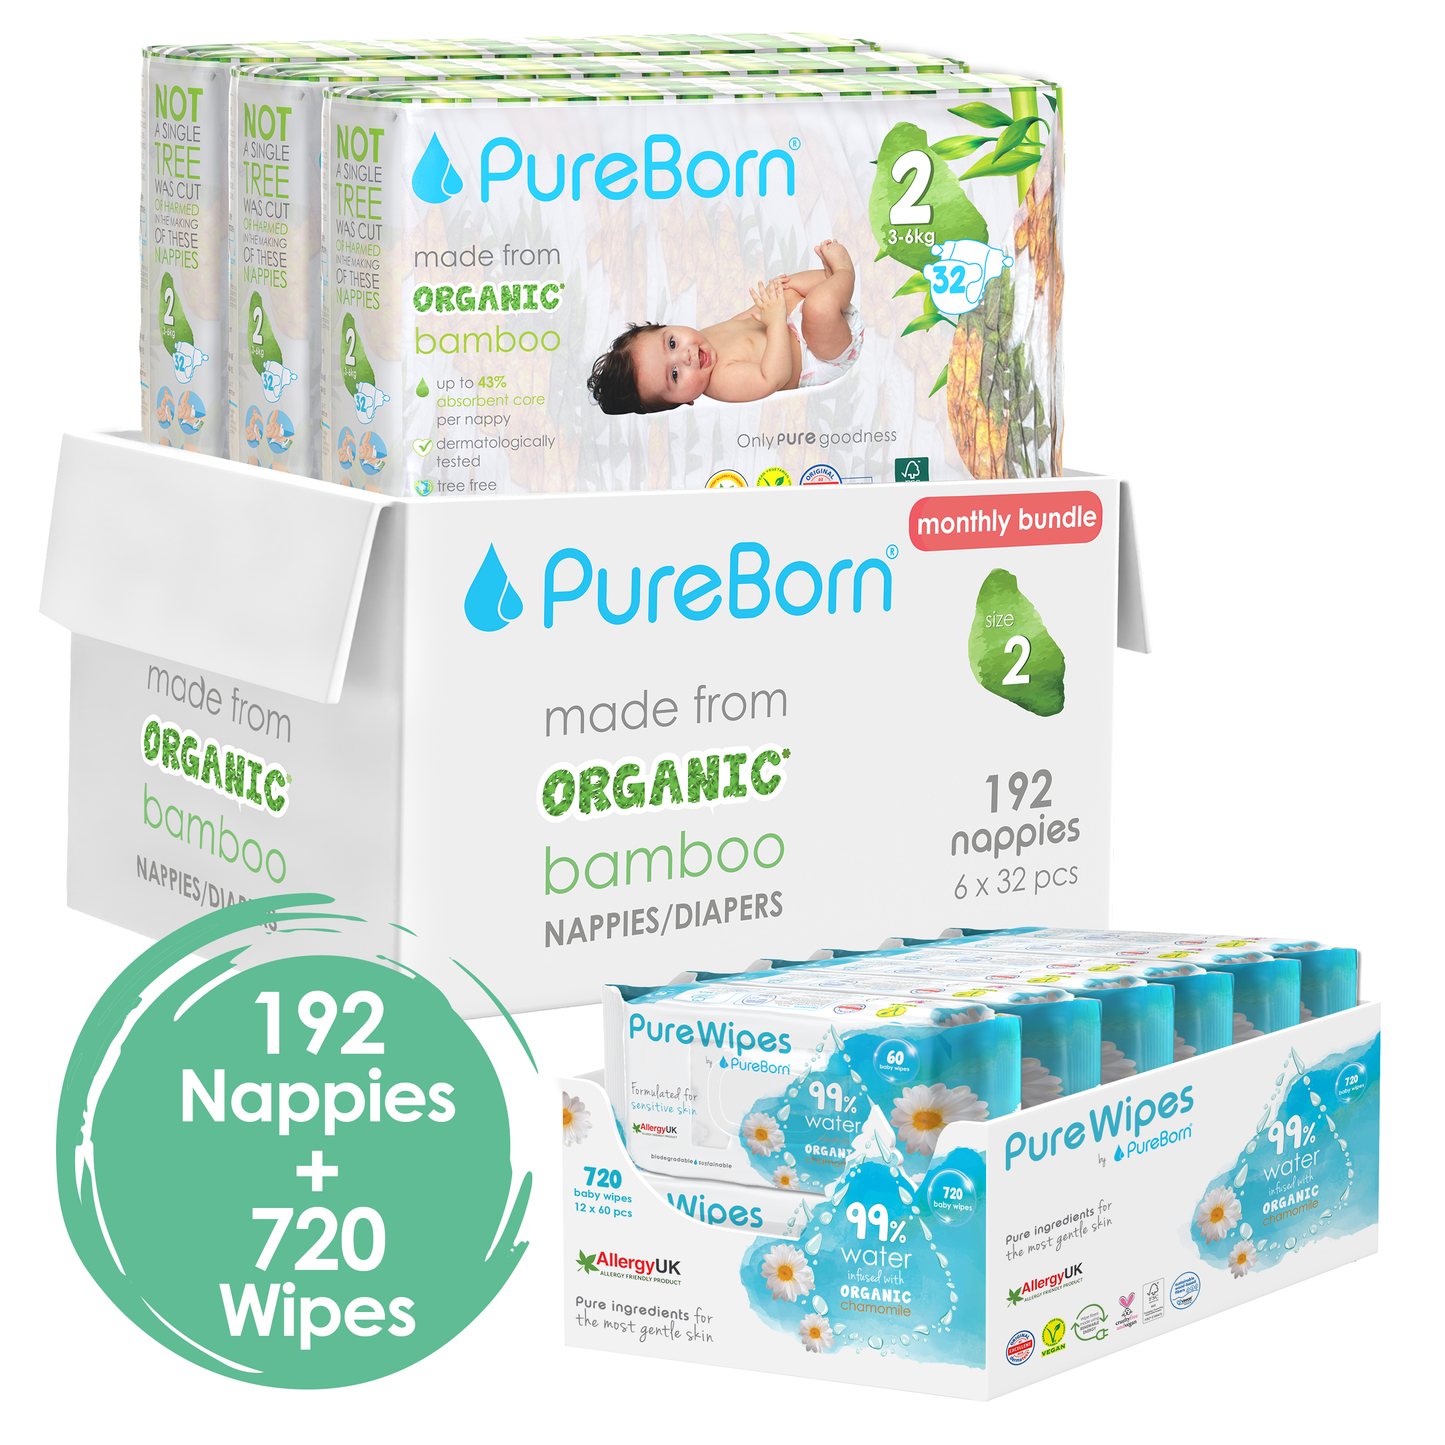 Monthly Nappy and Wipes Bundles